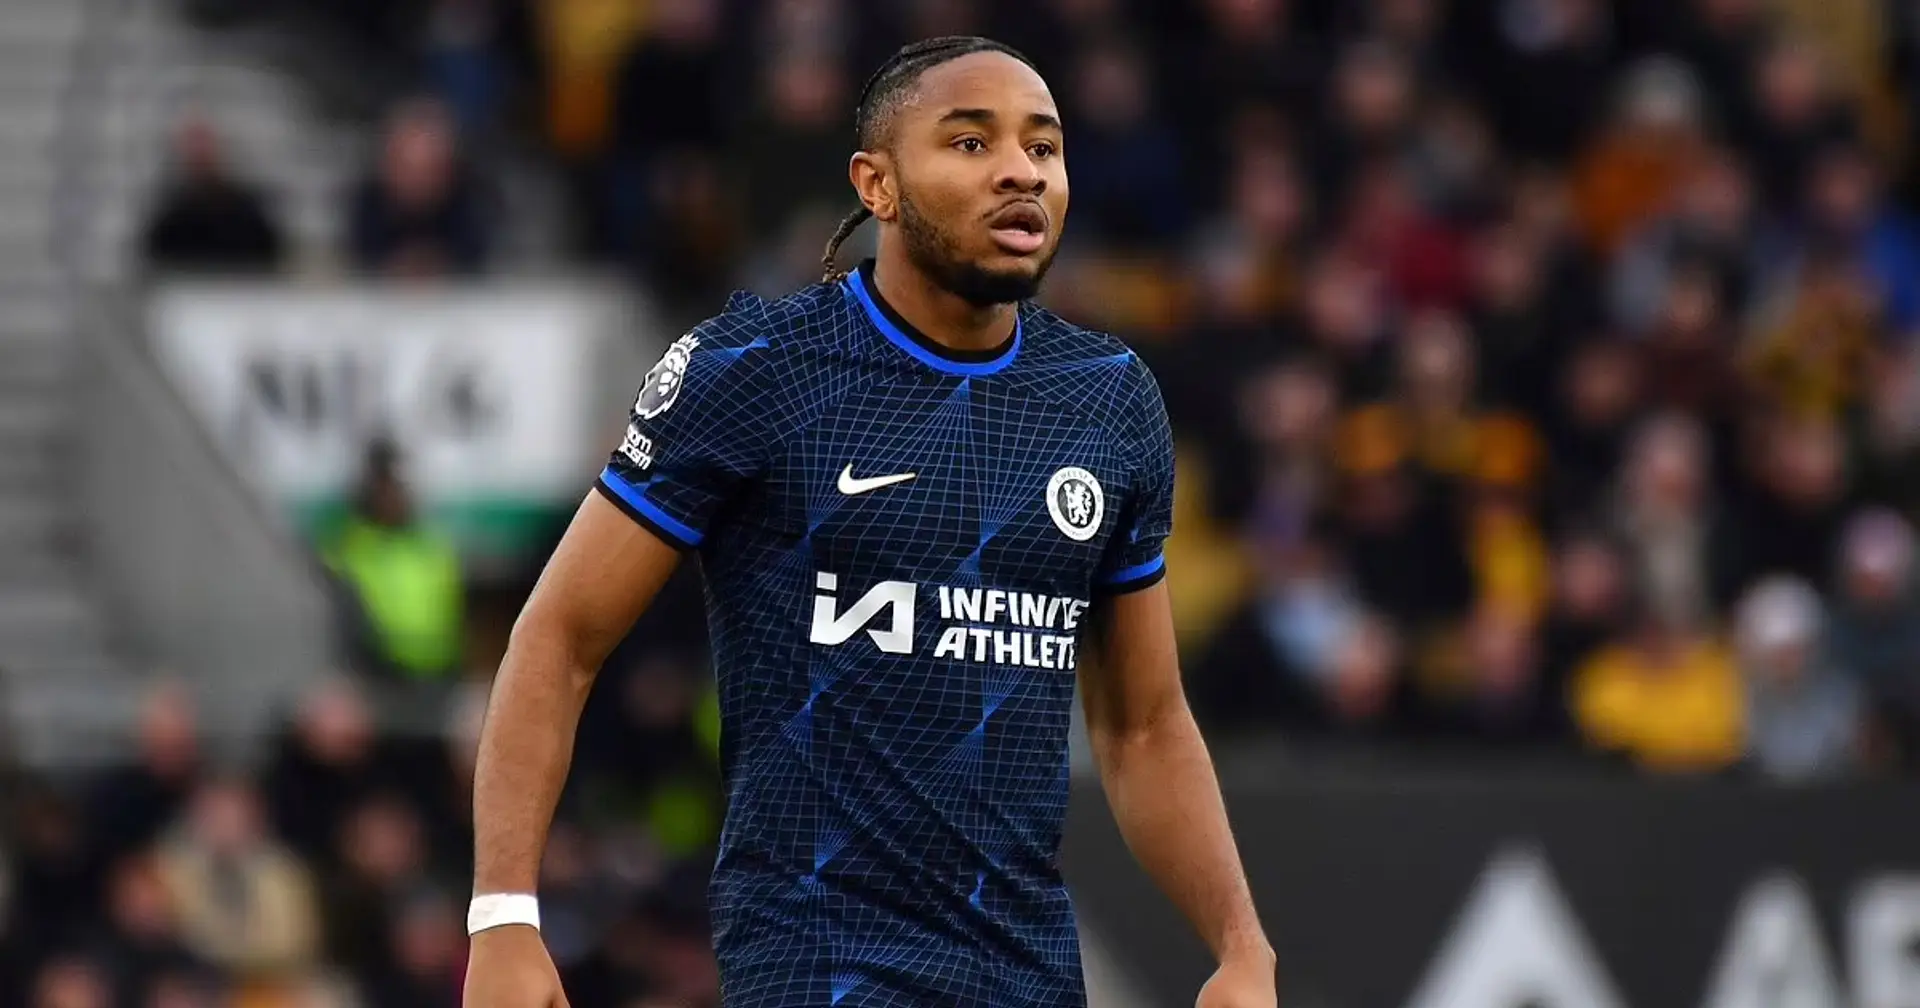 Nkunku back in training & 2 more big stories you might've missed